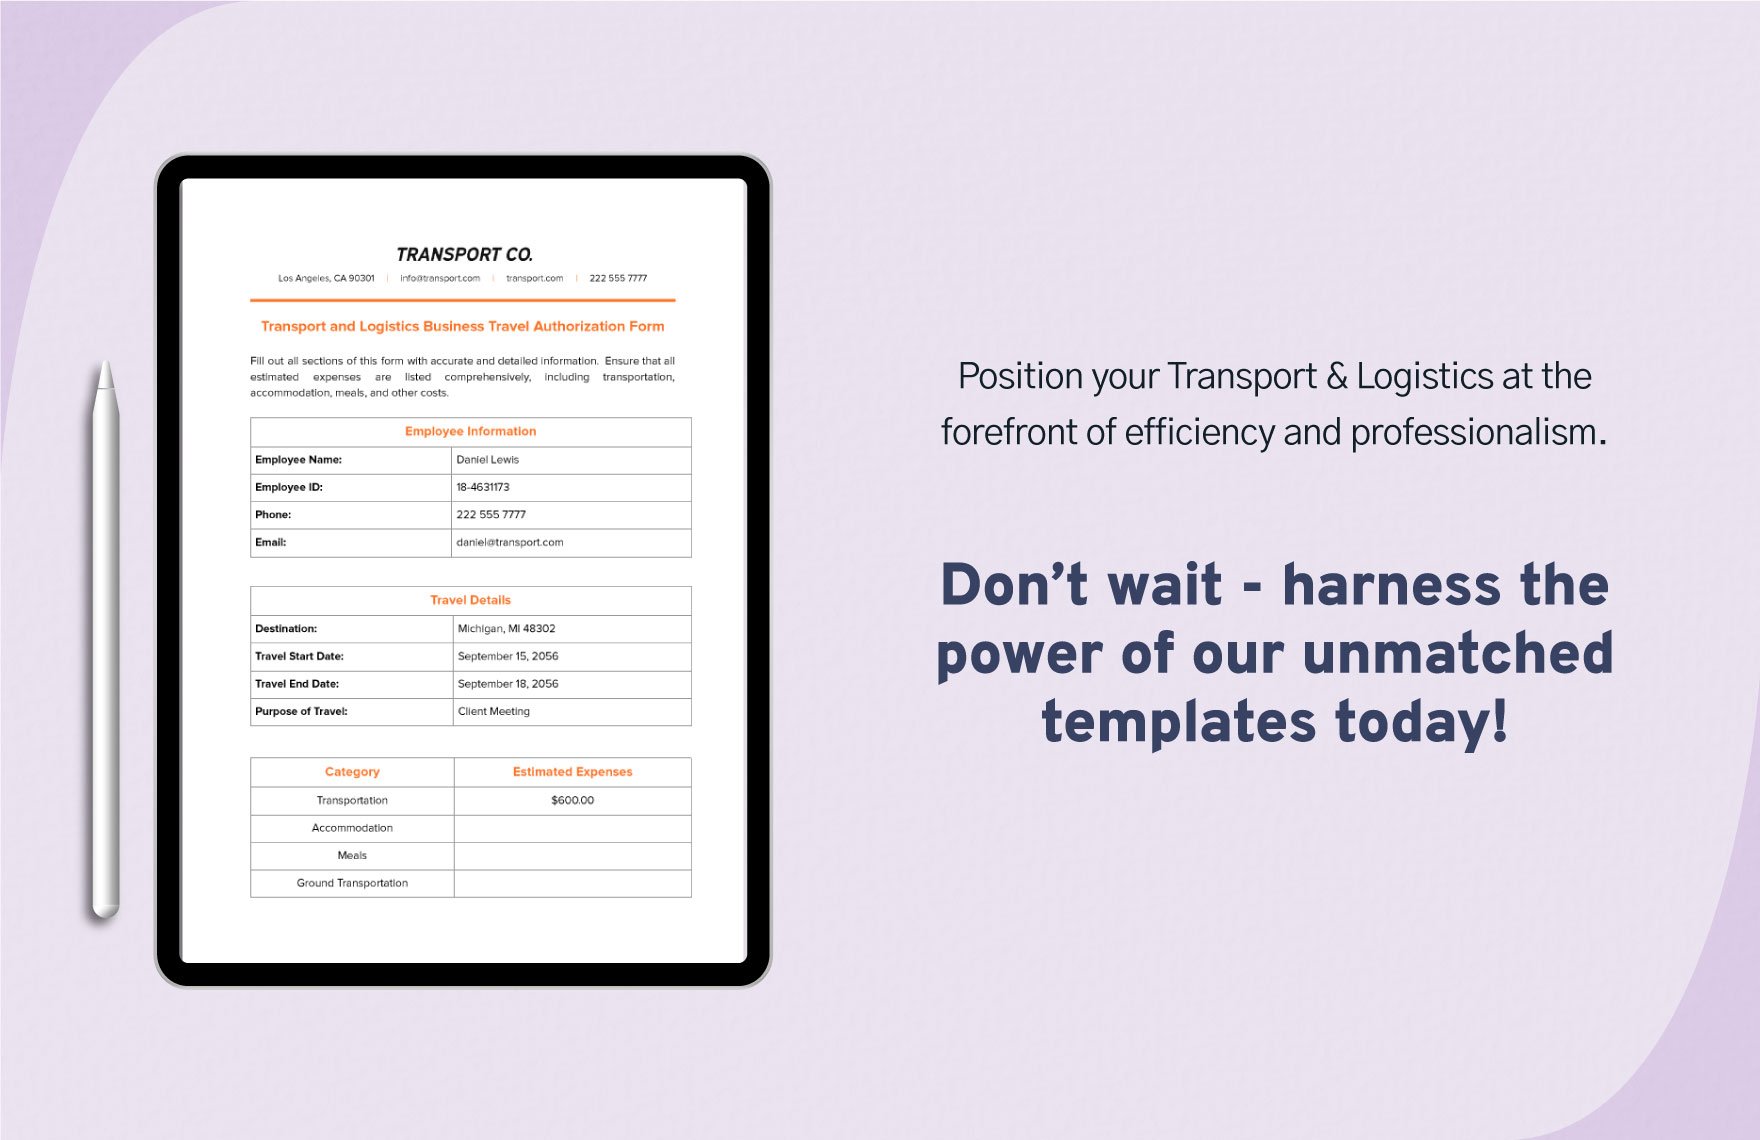 Transport and Logistics Business Travel Authorization Form Template